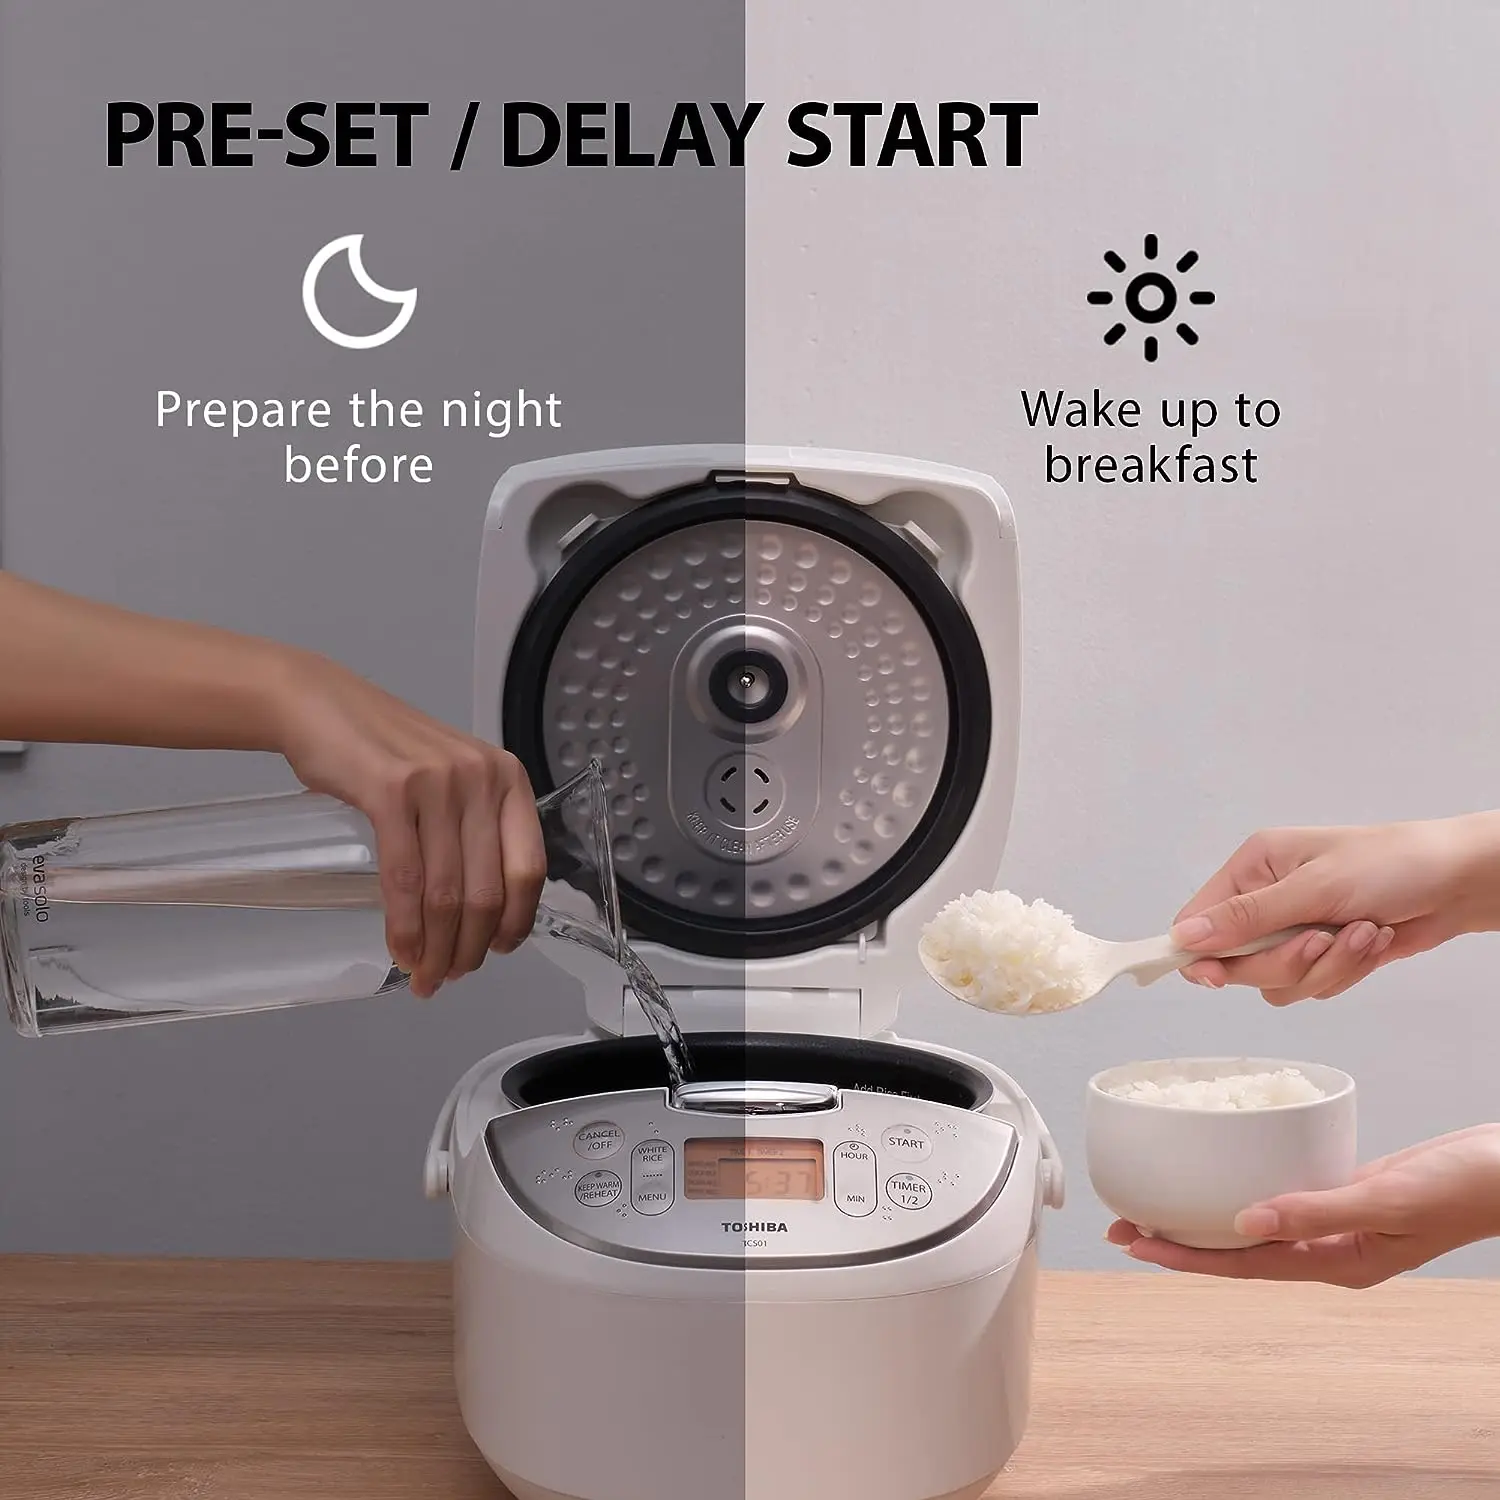 https://ae01.alicdn.com/kf/Sa0df8b9a08c14b78a1f8d1f01904c424g/Rice-Cooker-6-Cup-Uncooked-u2013-Rice-Maker-Cooker-with-Fuzzy-Logic-Technology-7-Cooking-Functions.jpg